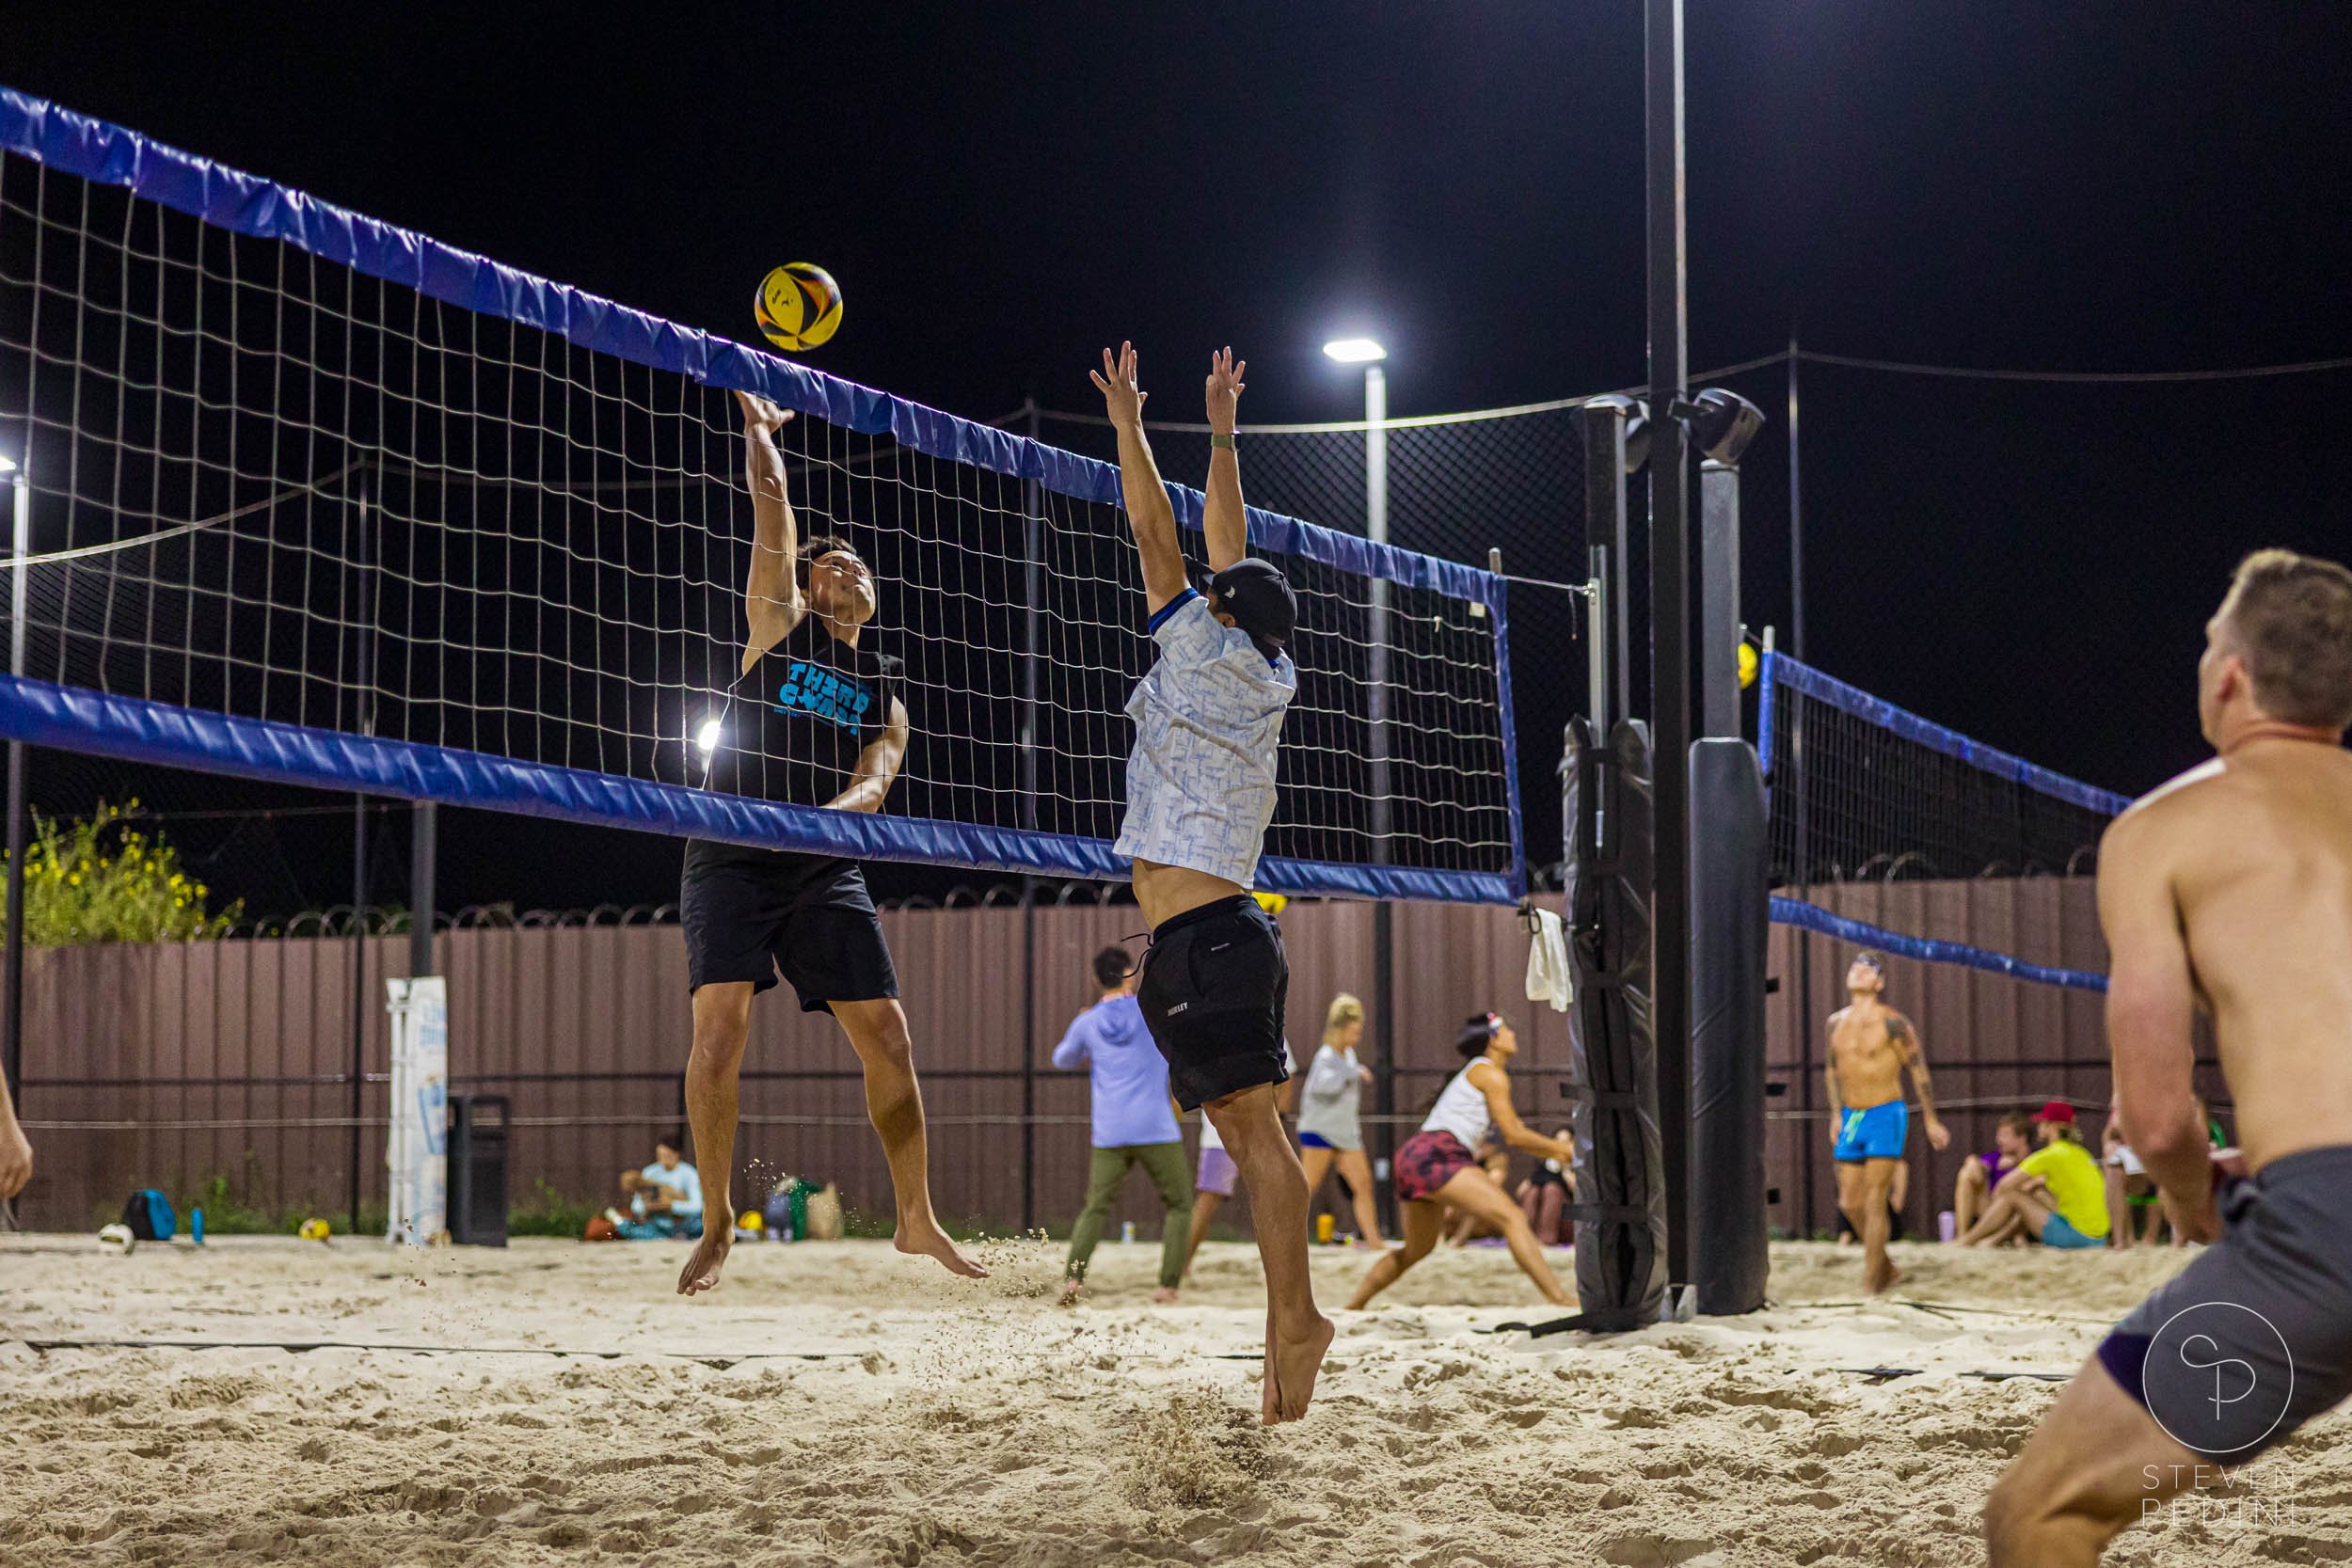 Steven Pedini Photography - Bumpy Pickle - Sand Volleyball - Houston TX - World Cup of Volleyball - 00402.jpg